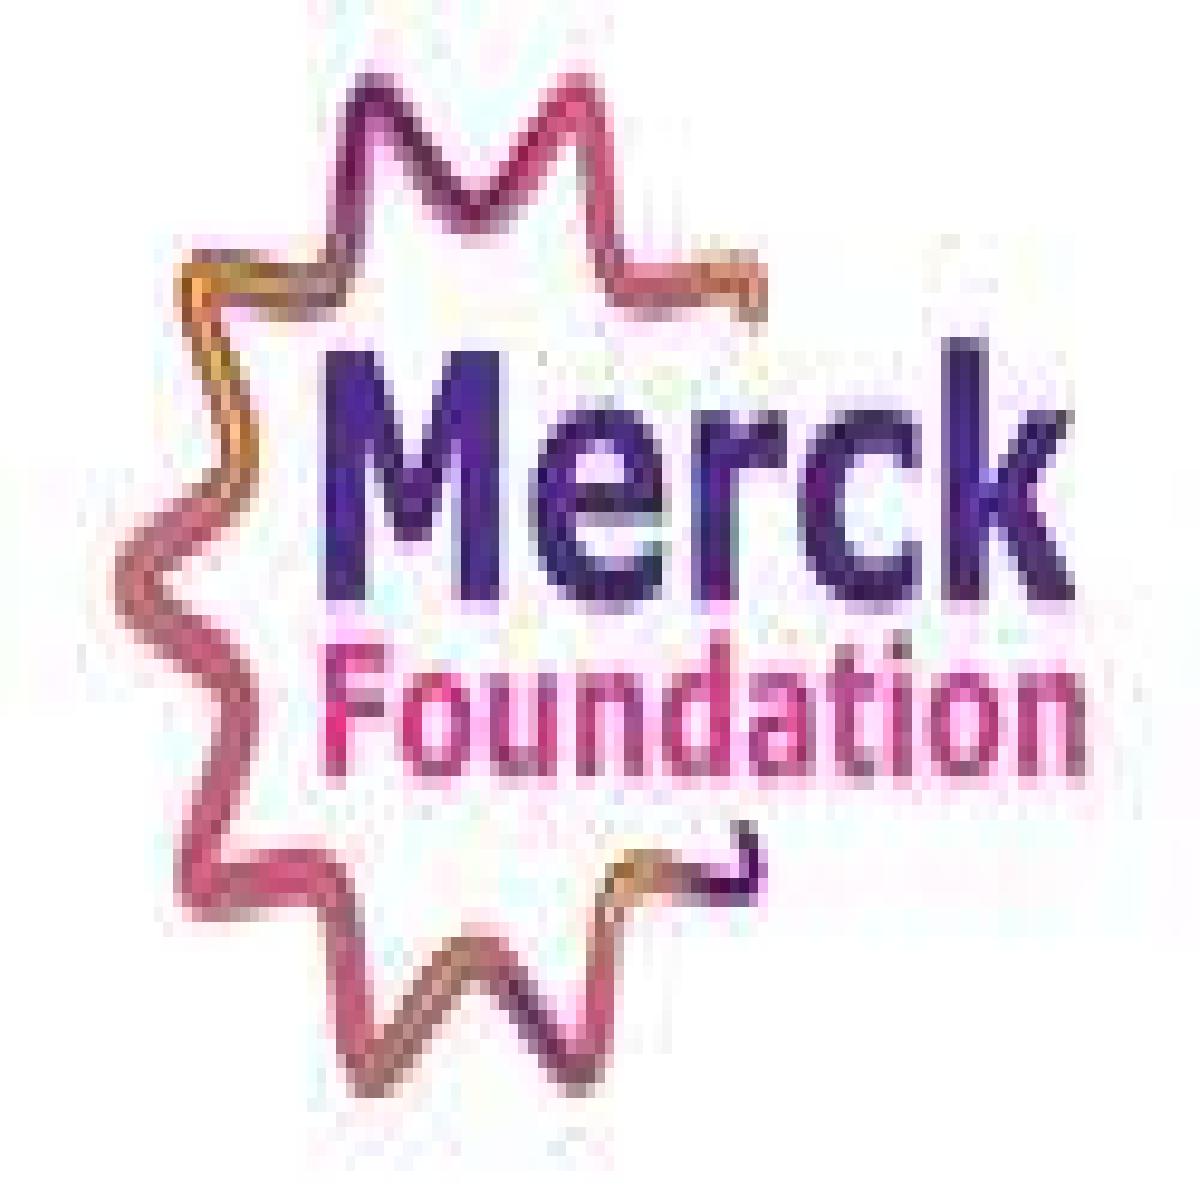 Merck Foundation Together with African First Ladies Mark “World Heart Day 2022” by Providing 720 Scholarships of Preventative Cardiovascular, Diabetes and Endocrinology for Doctors from 45 Countries